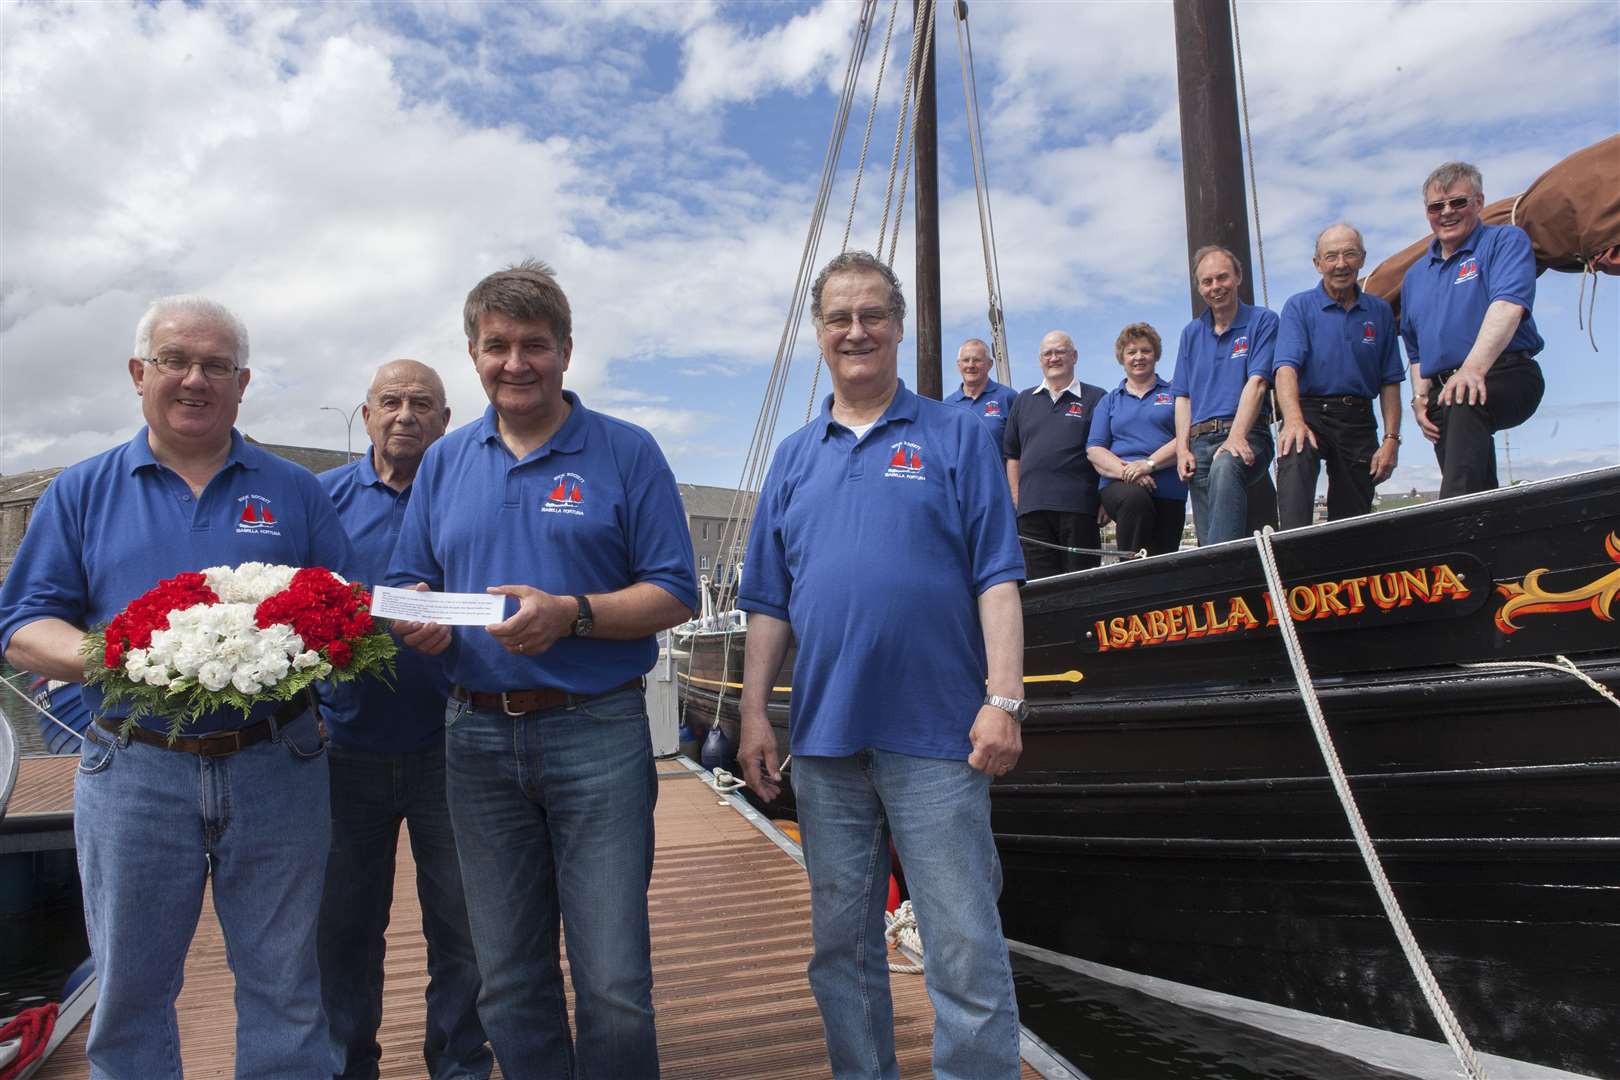 In 2016 the crew of the Wick Society's Isabella Fortuna laid a wreath at the HMS Exmouth wreck site in memory of one of the lost sailors. Picture: Robert MacDonald / Northern Studios